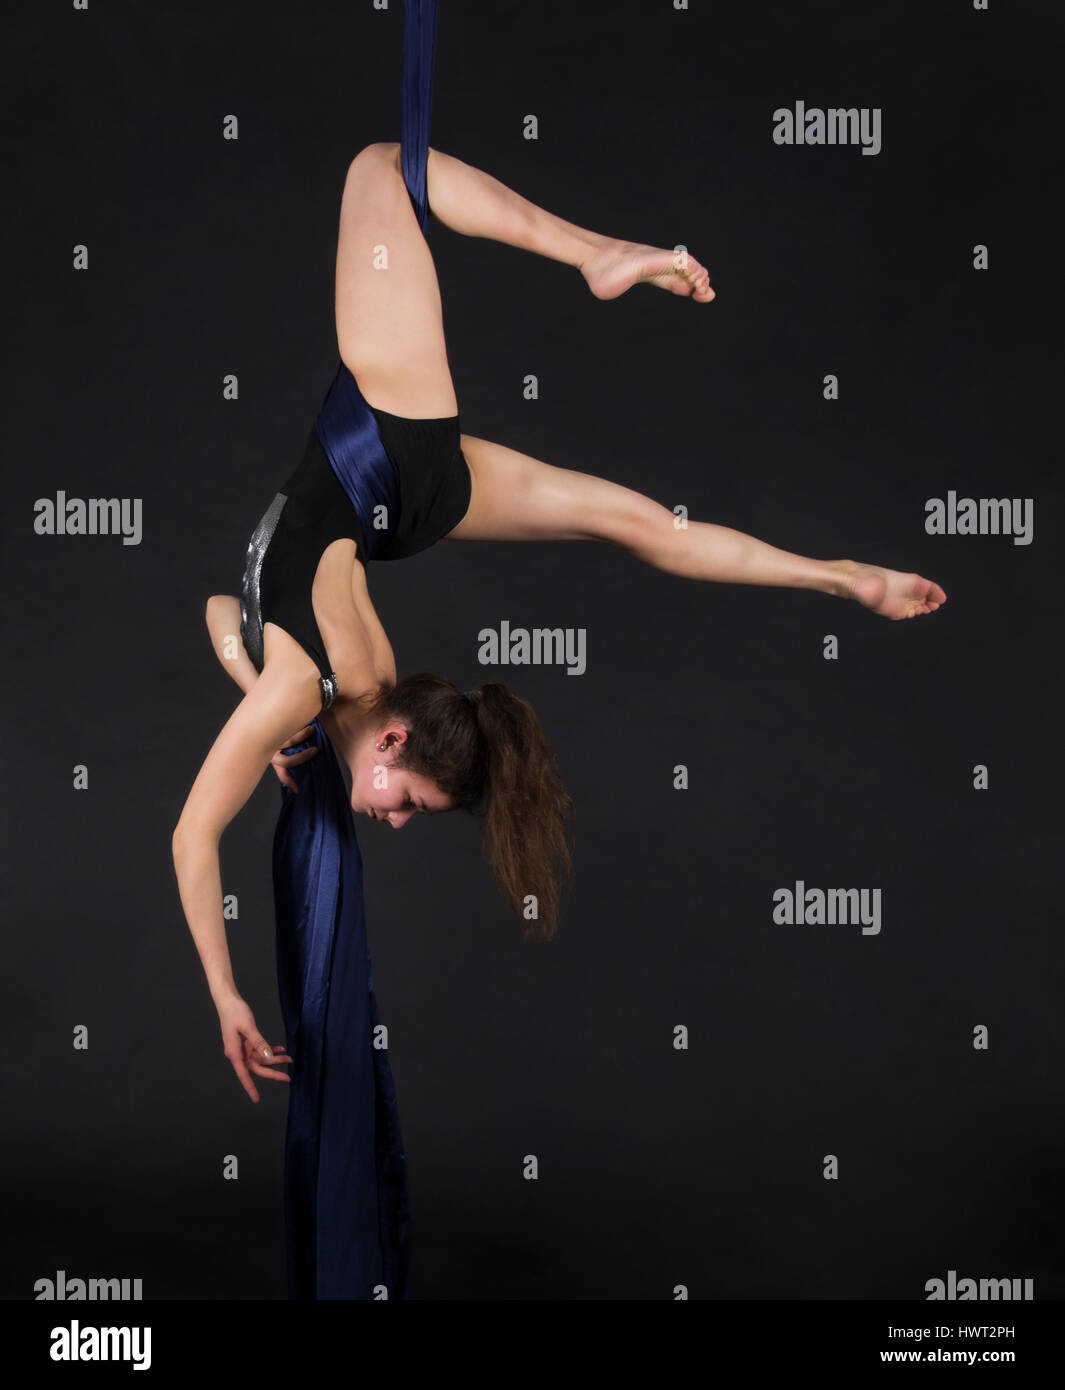 Young, smiling woman does exercises on the canvases. Studio recording of the performance on a dark background. Stock Photo